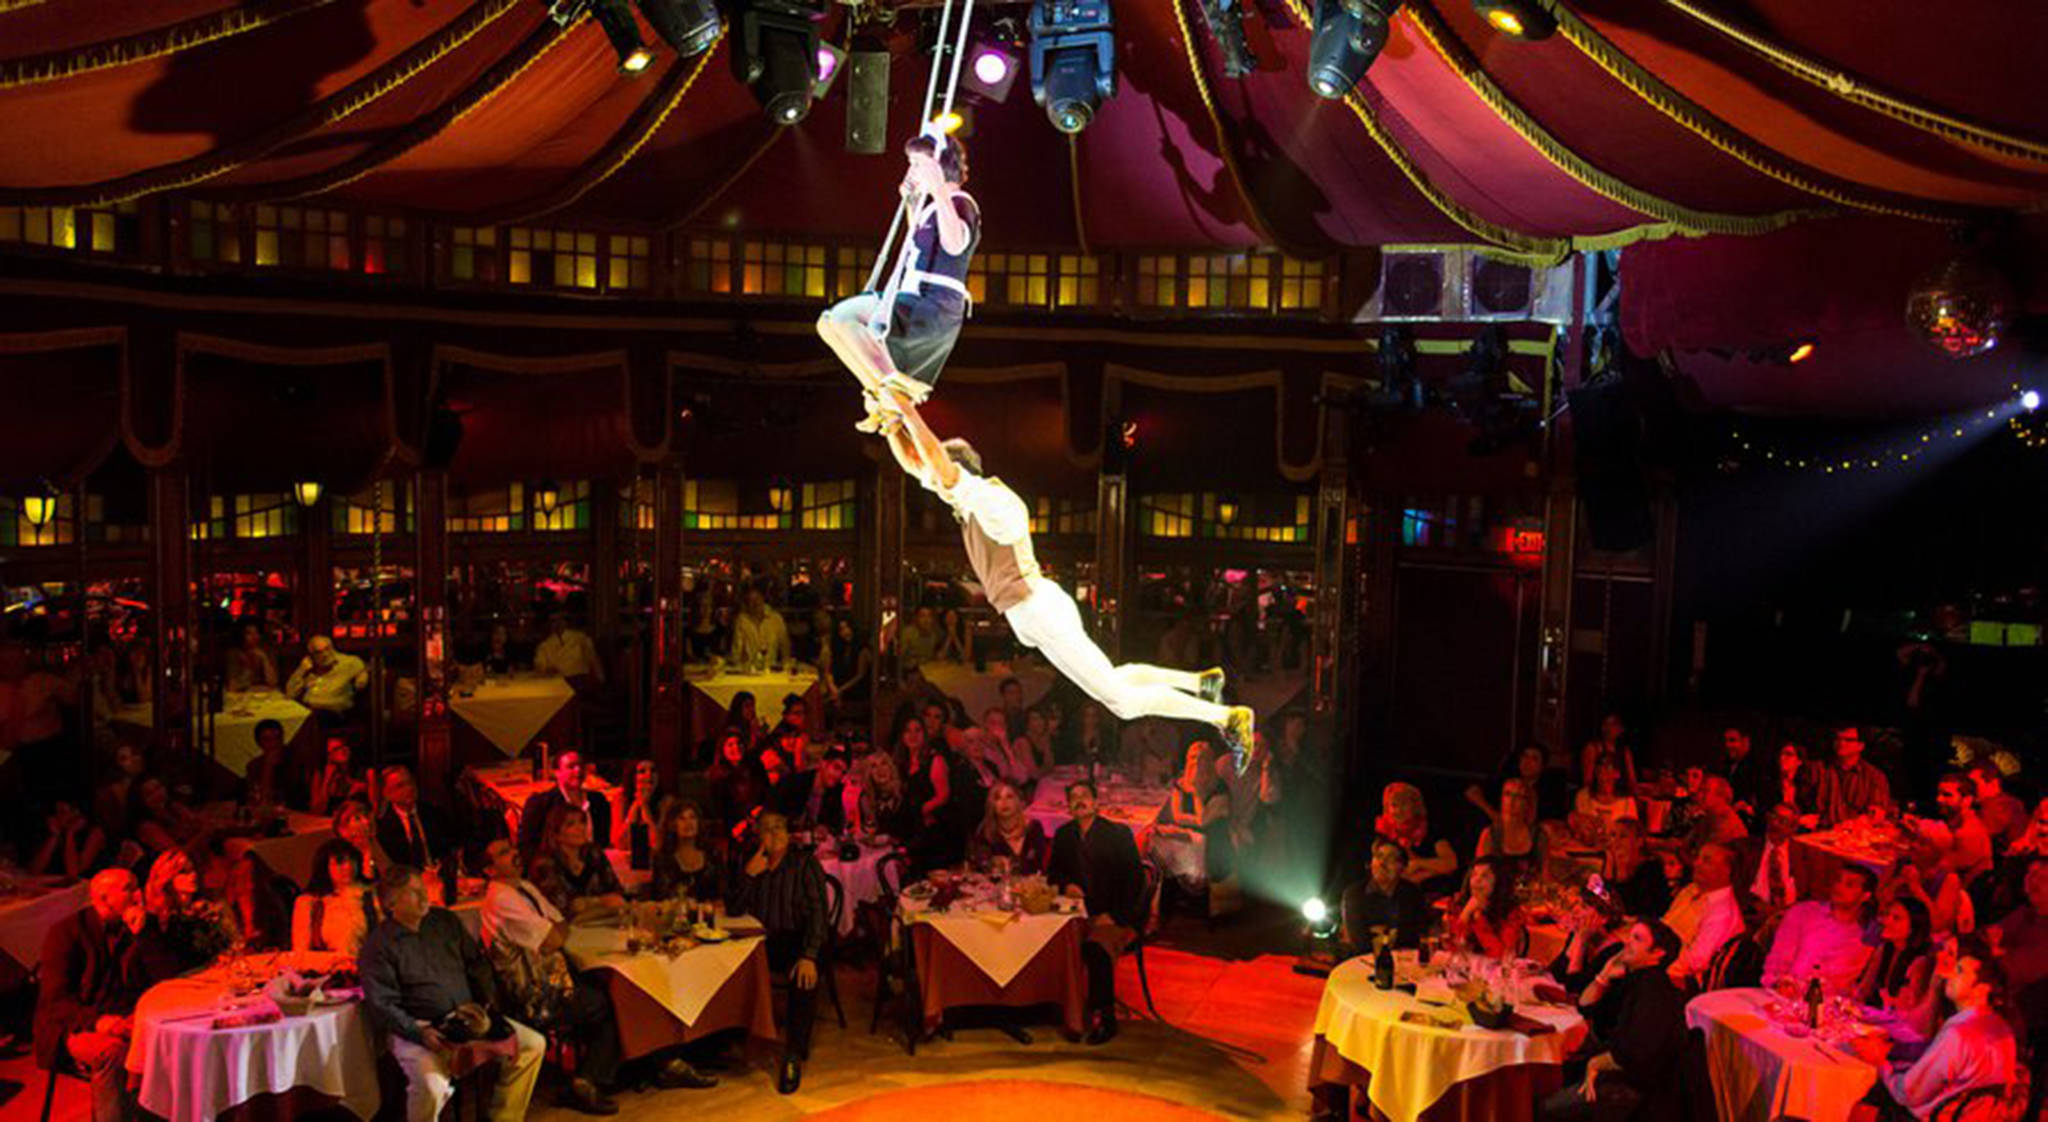 Performers fly through the Teatro ZinZanni spiegeltent. Courtesy of Mark Kitaoka